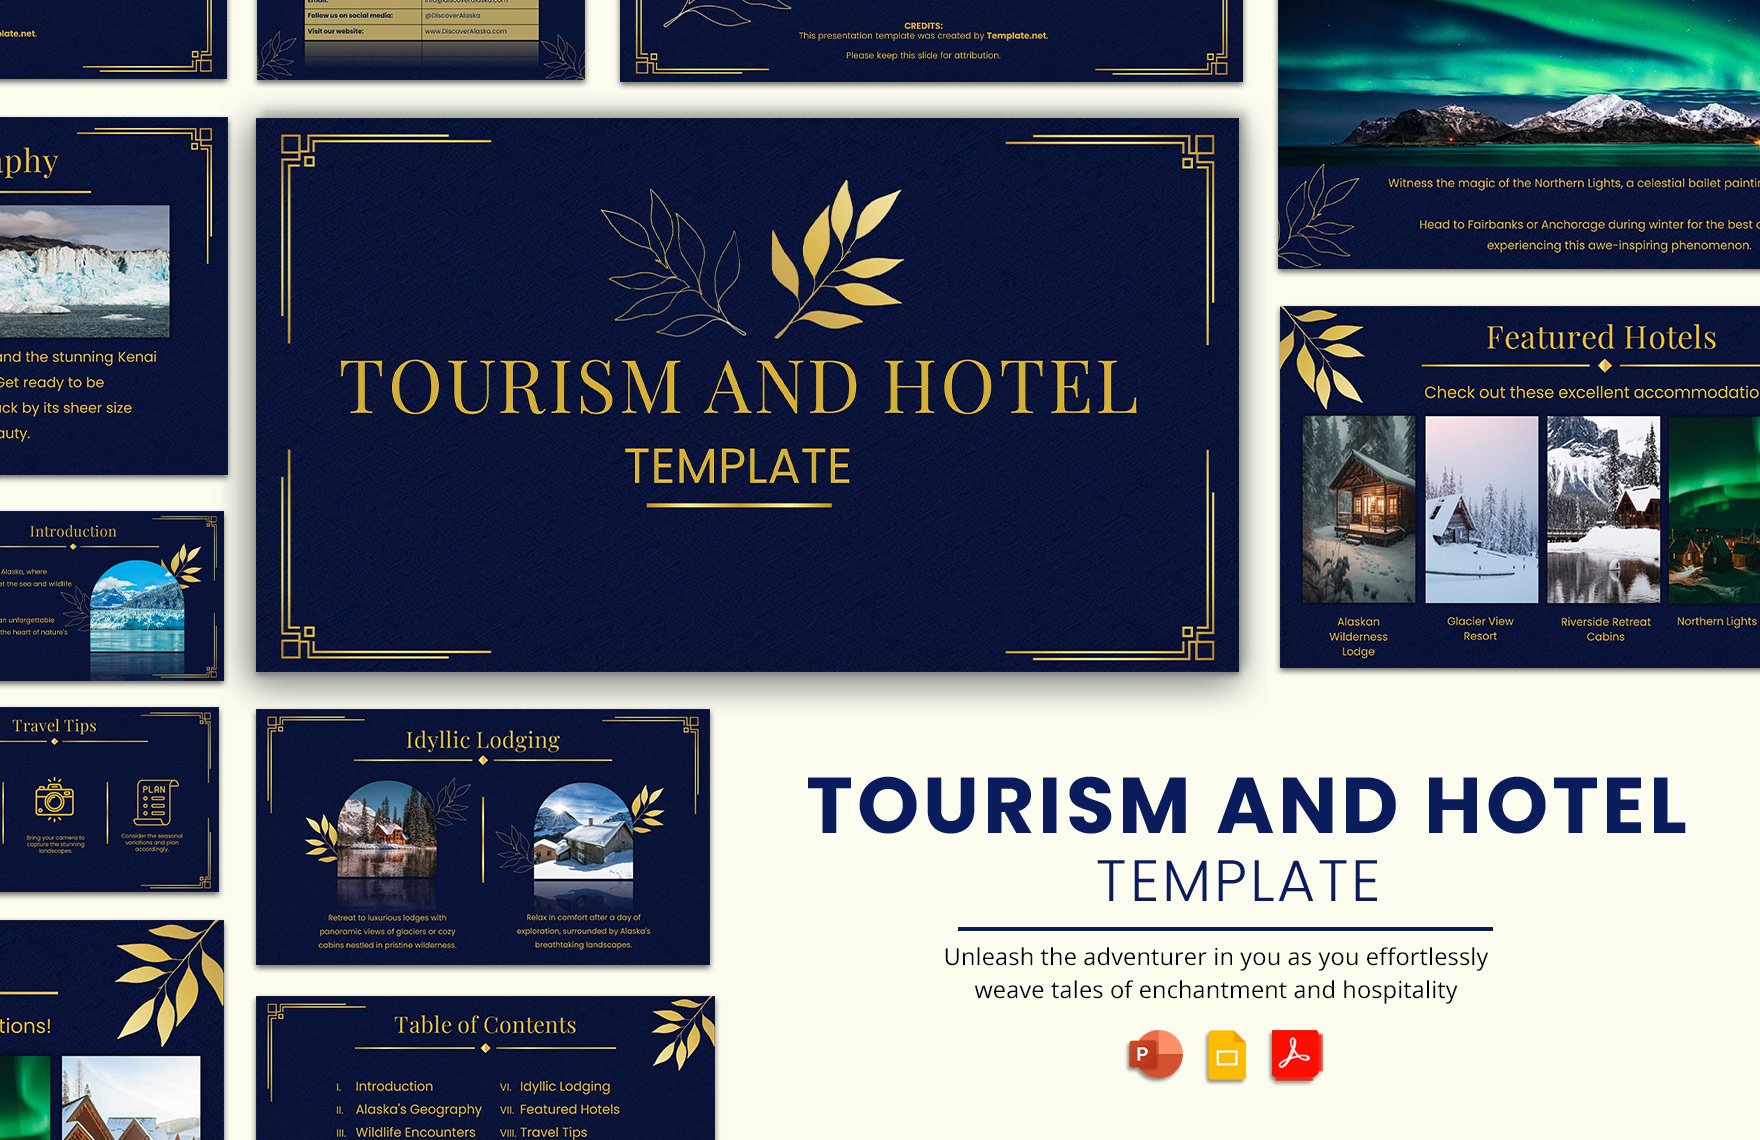 Tourism and Hotel Template